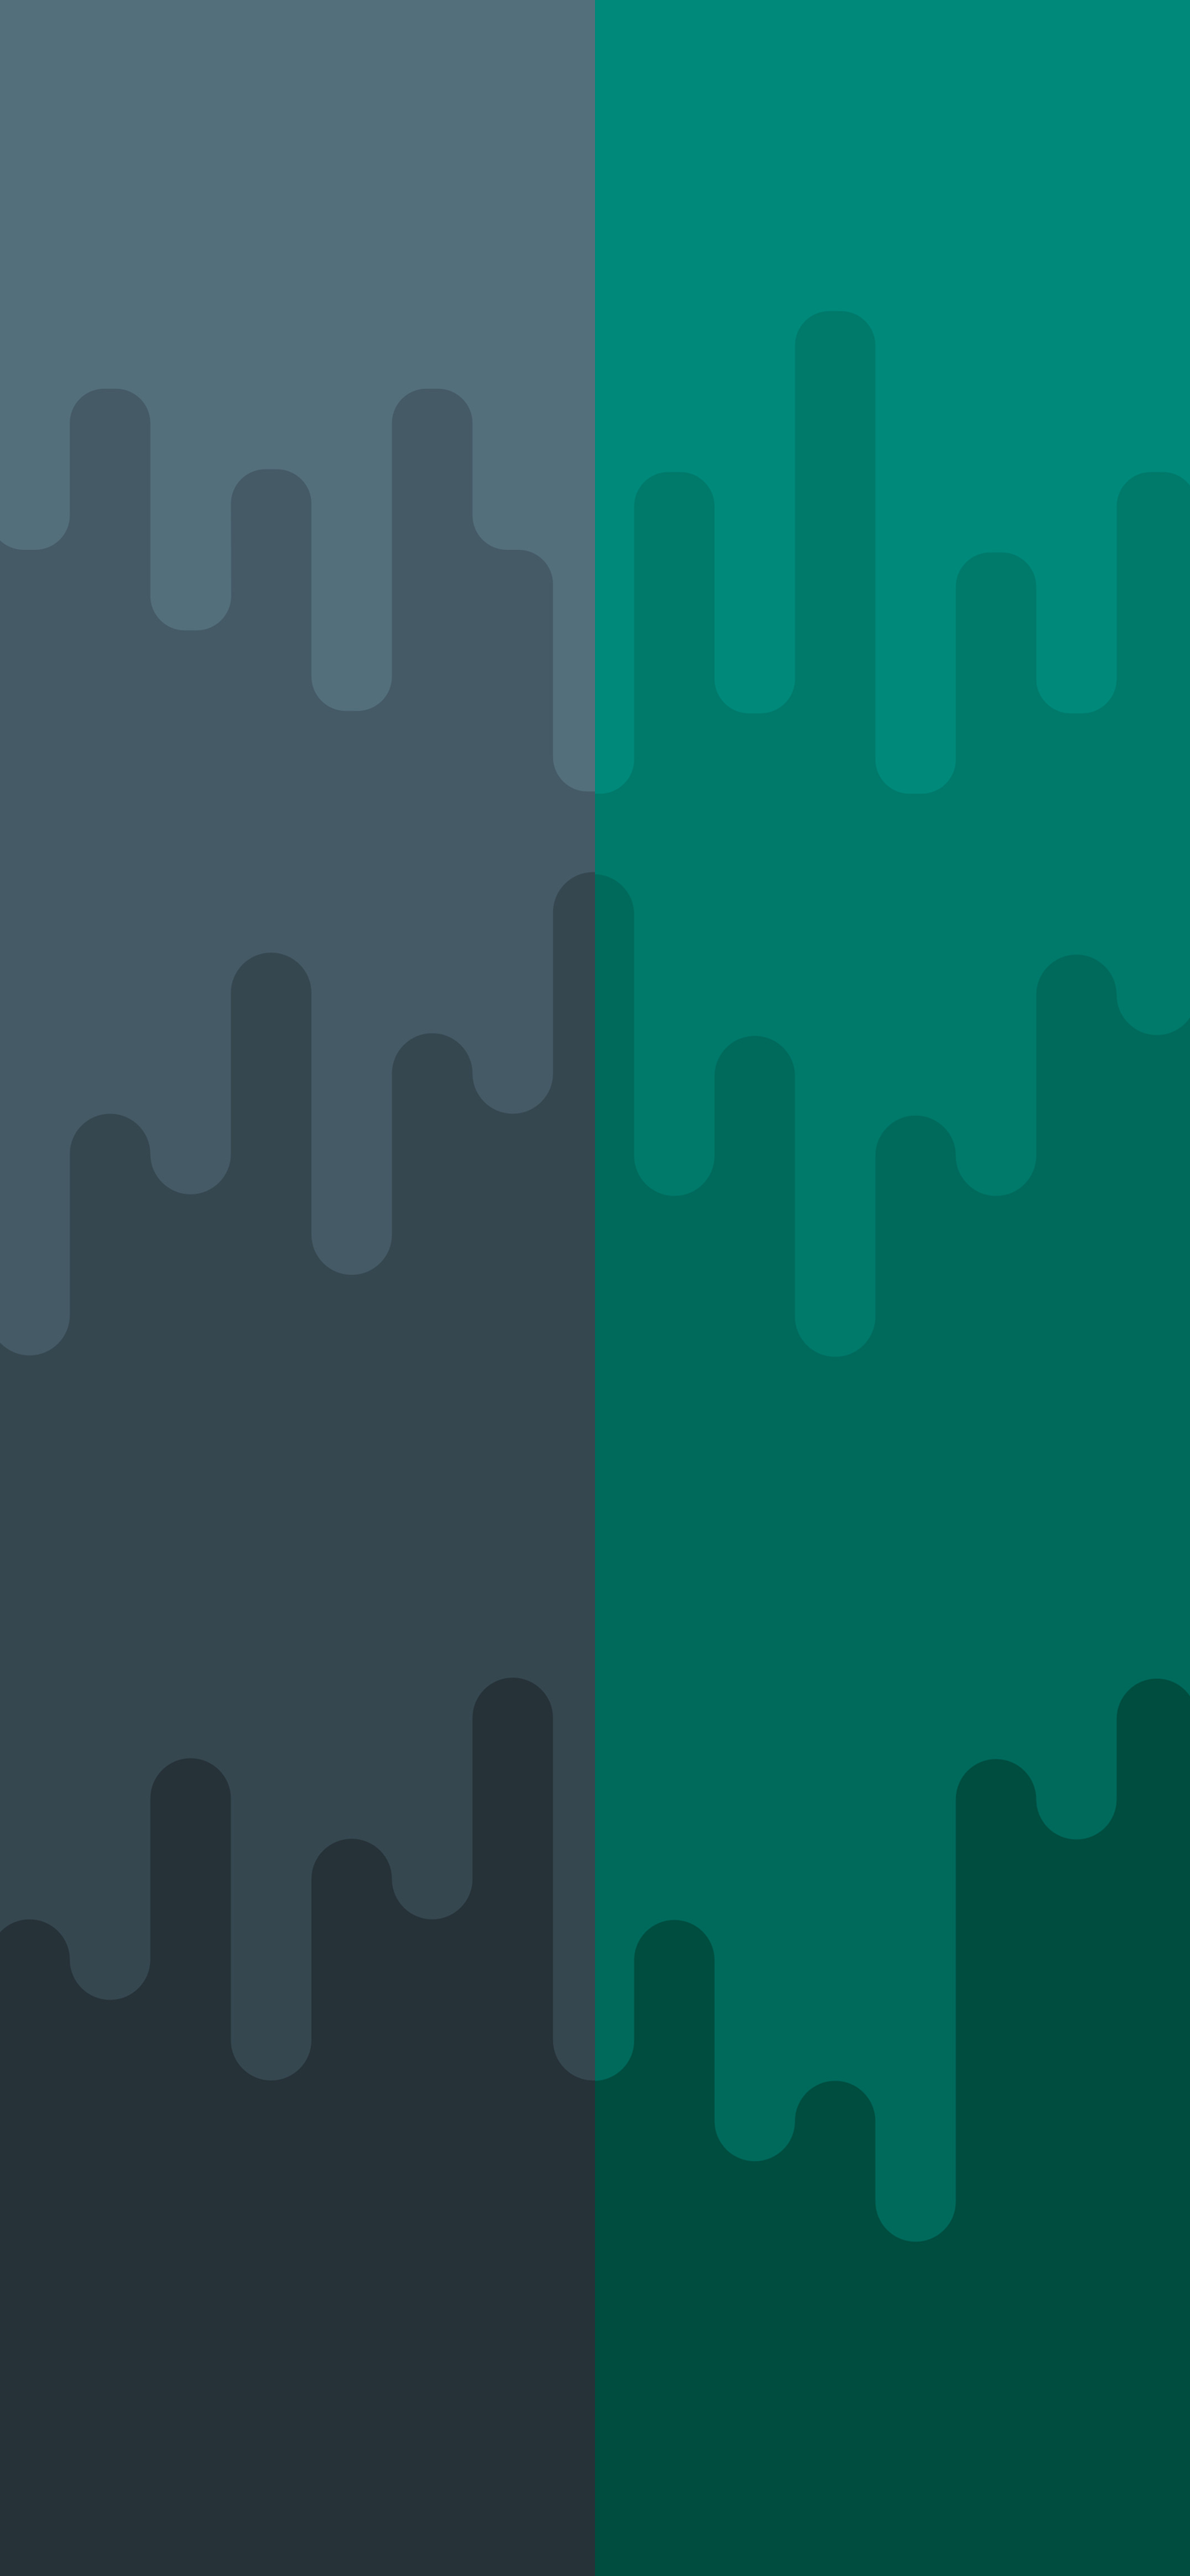 Up and Down - Gray and Green | DUAL - Wallpapers Central